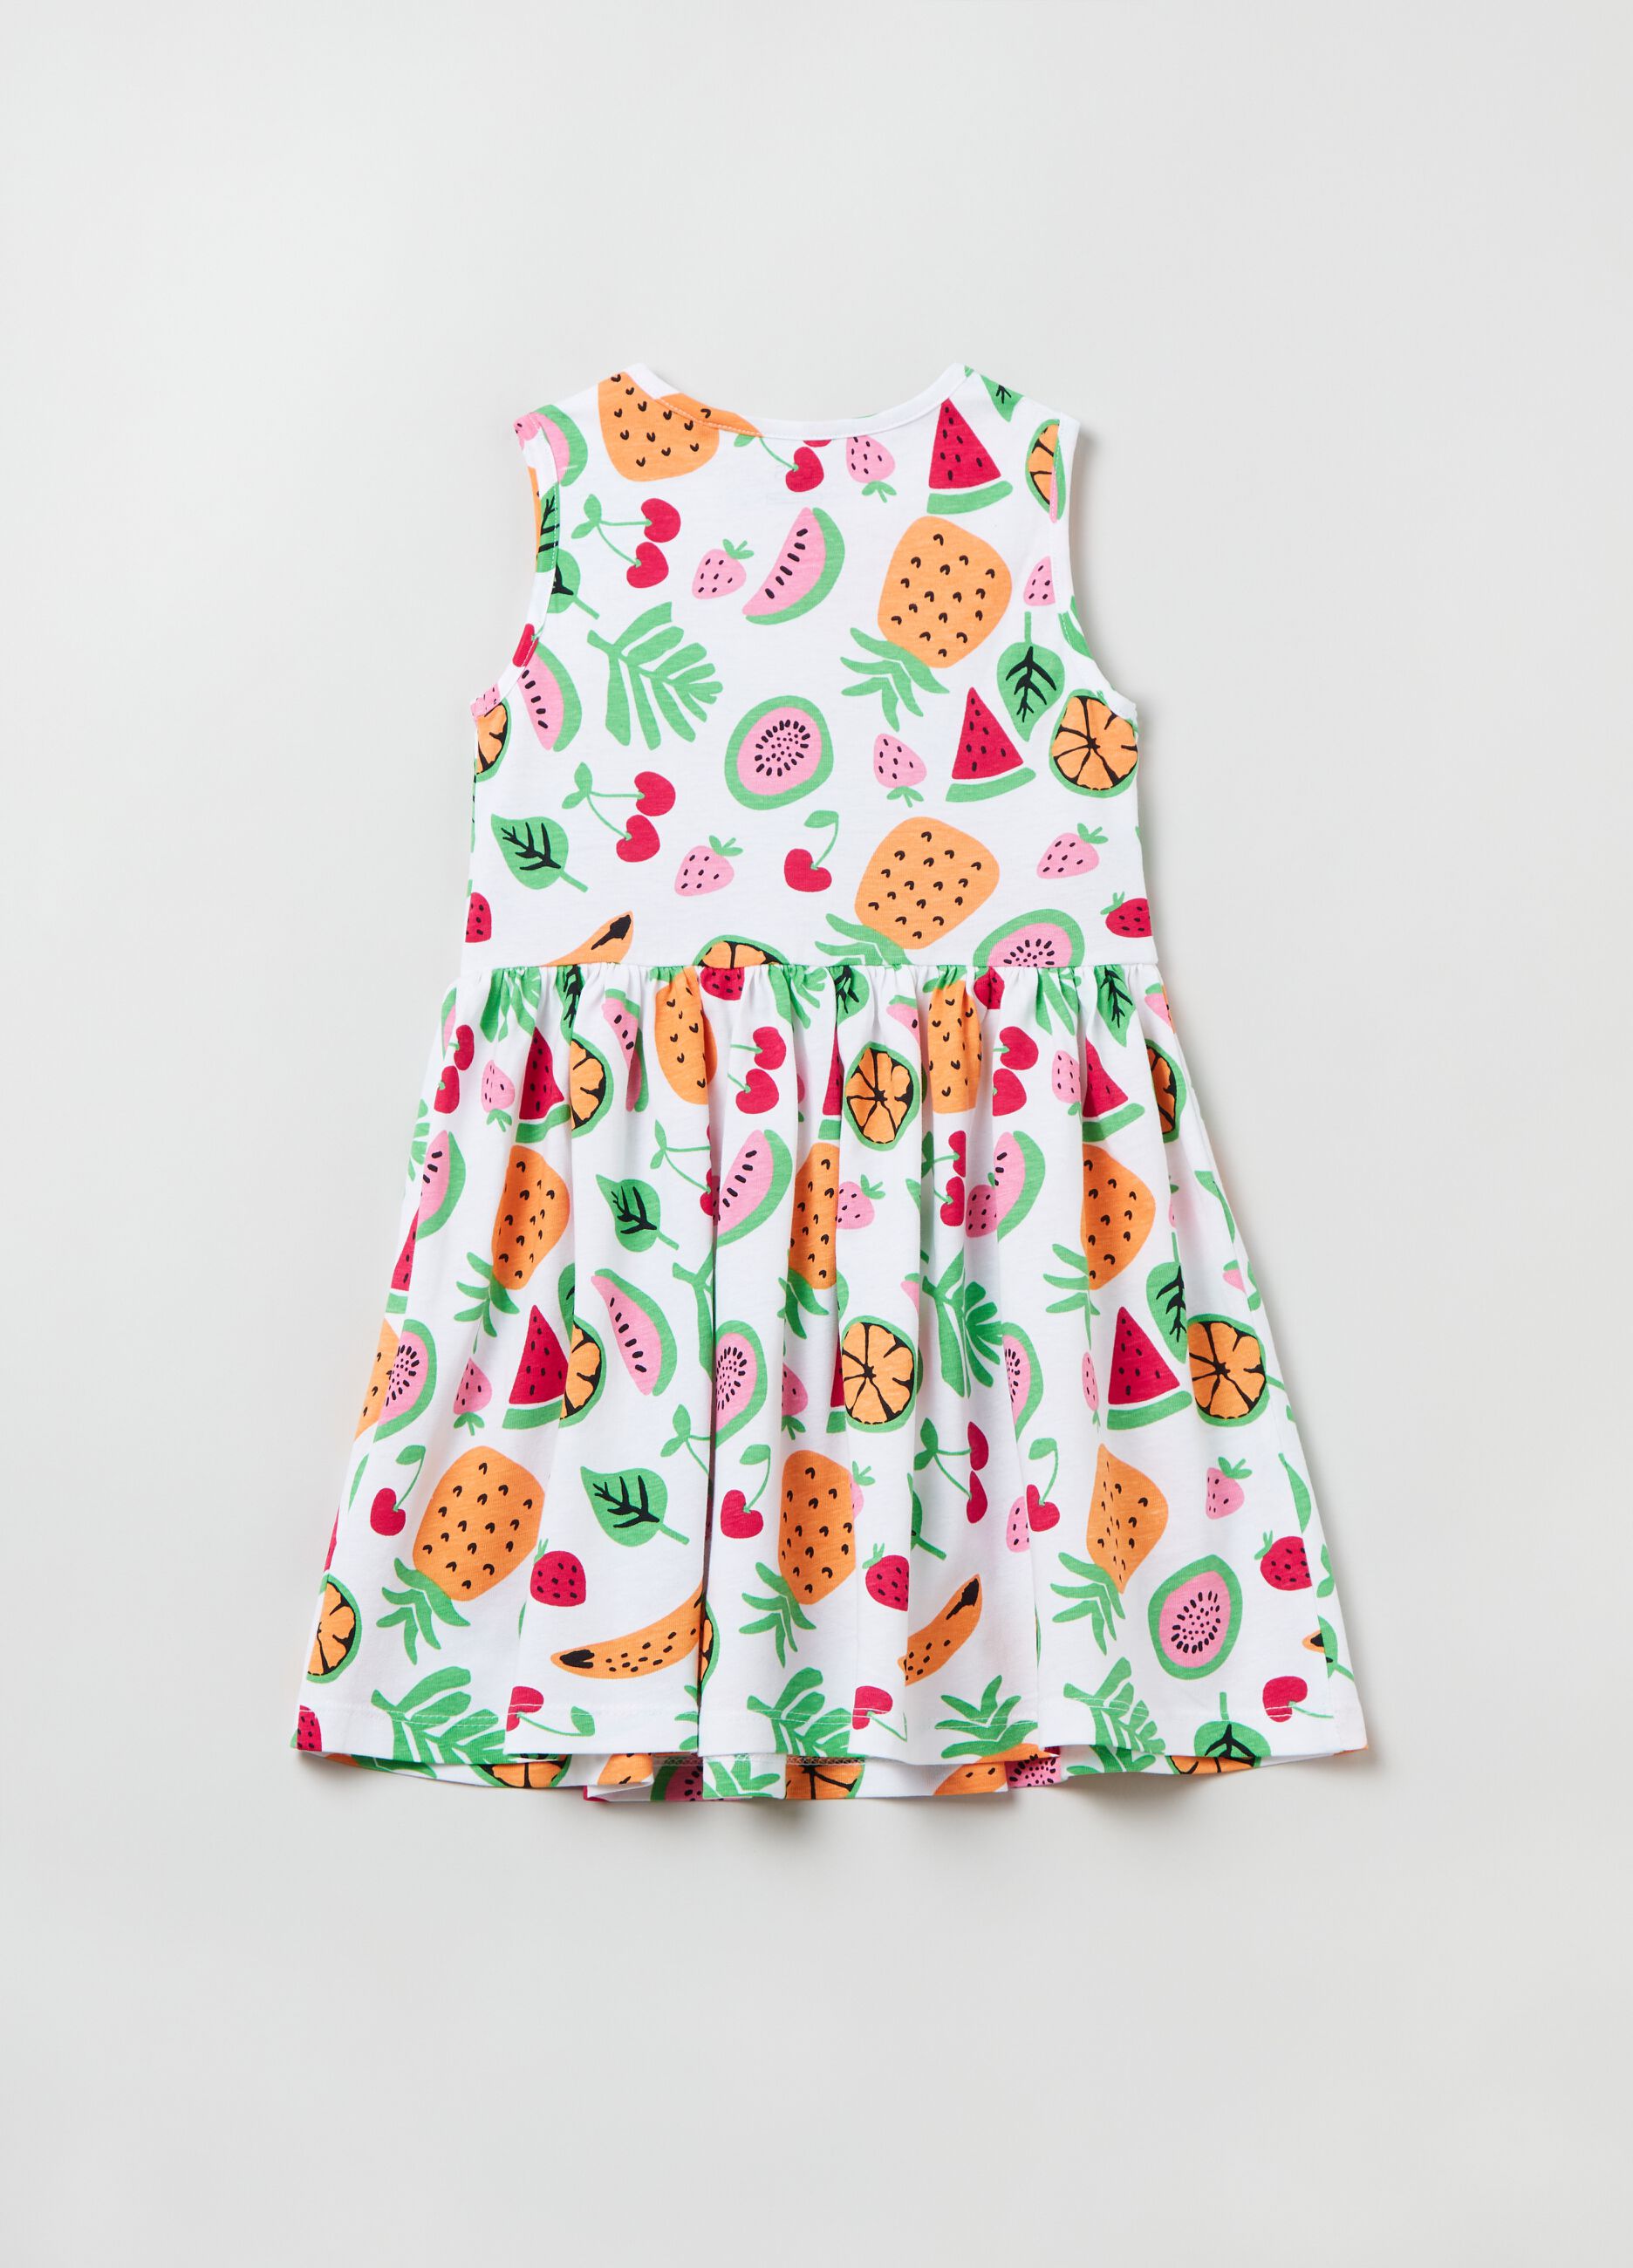 Sleeveless dress in cotton with print